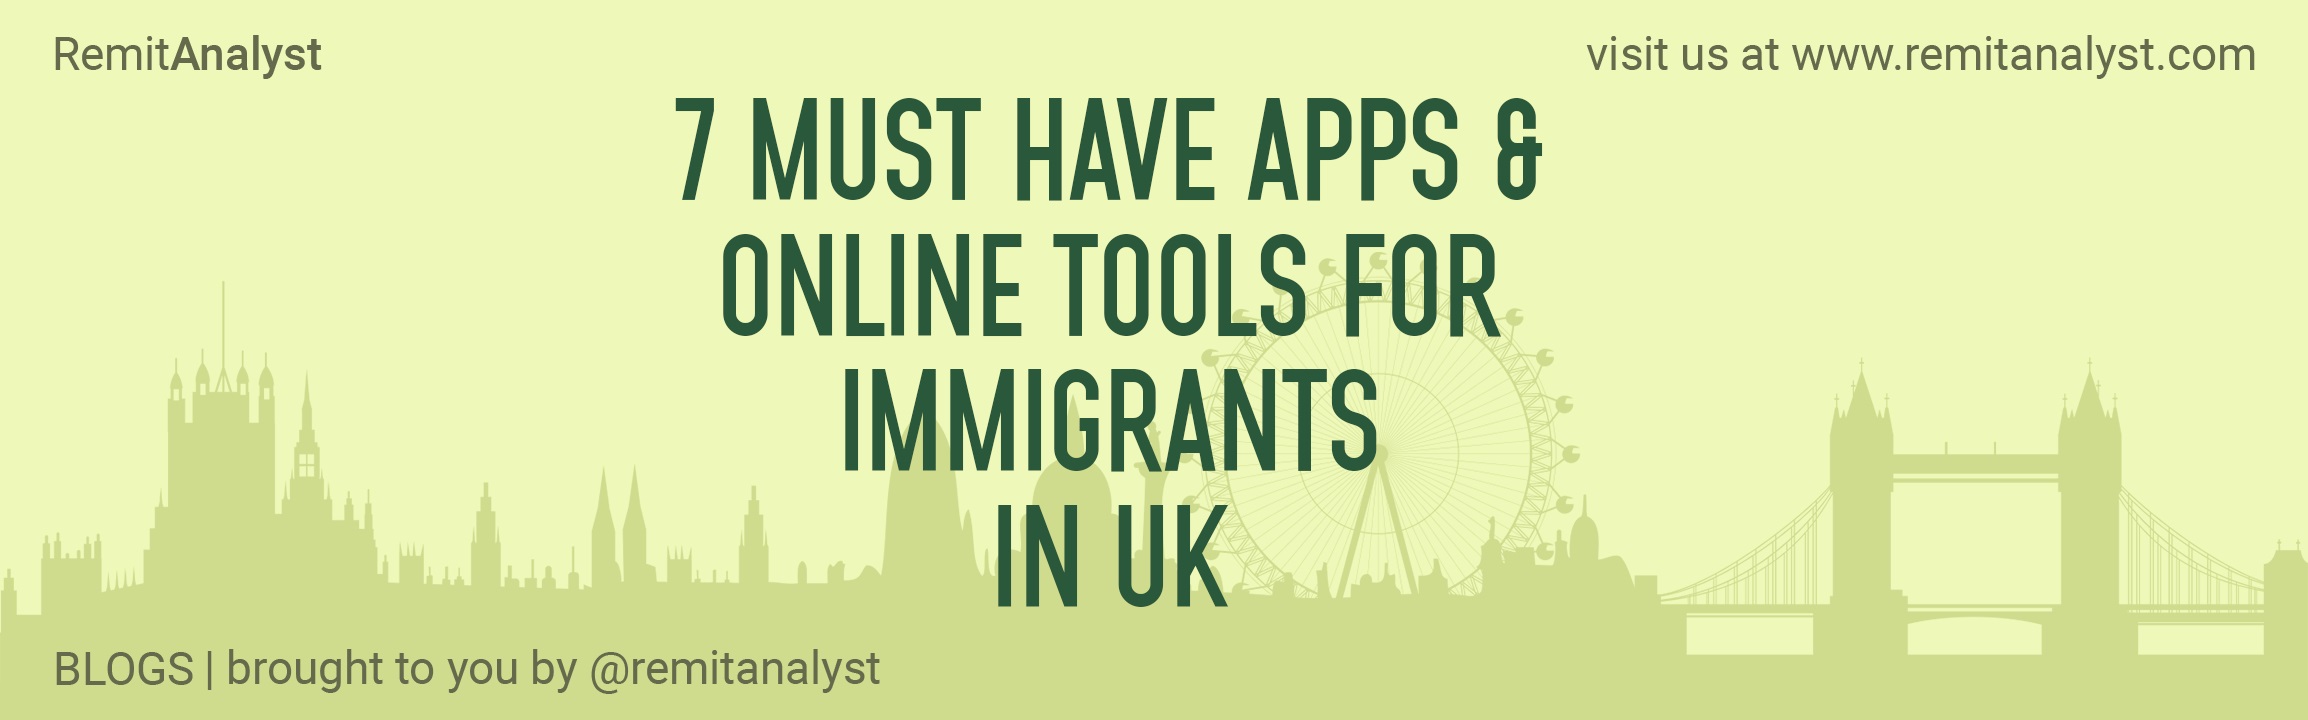 7-must-have-apps-and-online-tools-for-immigrants-in-uk-title